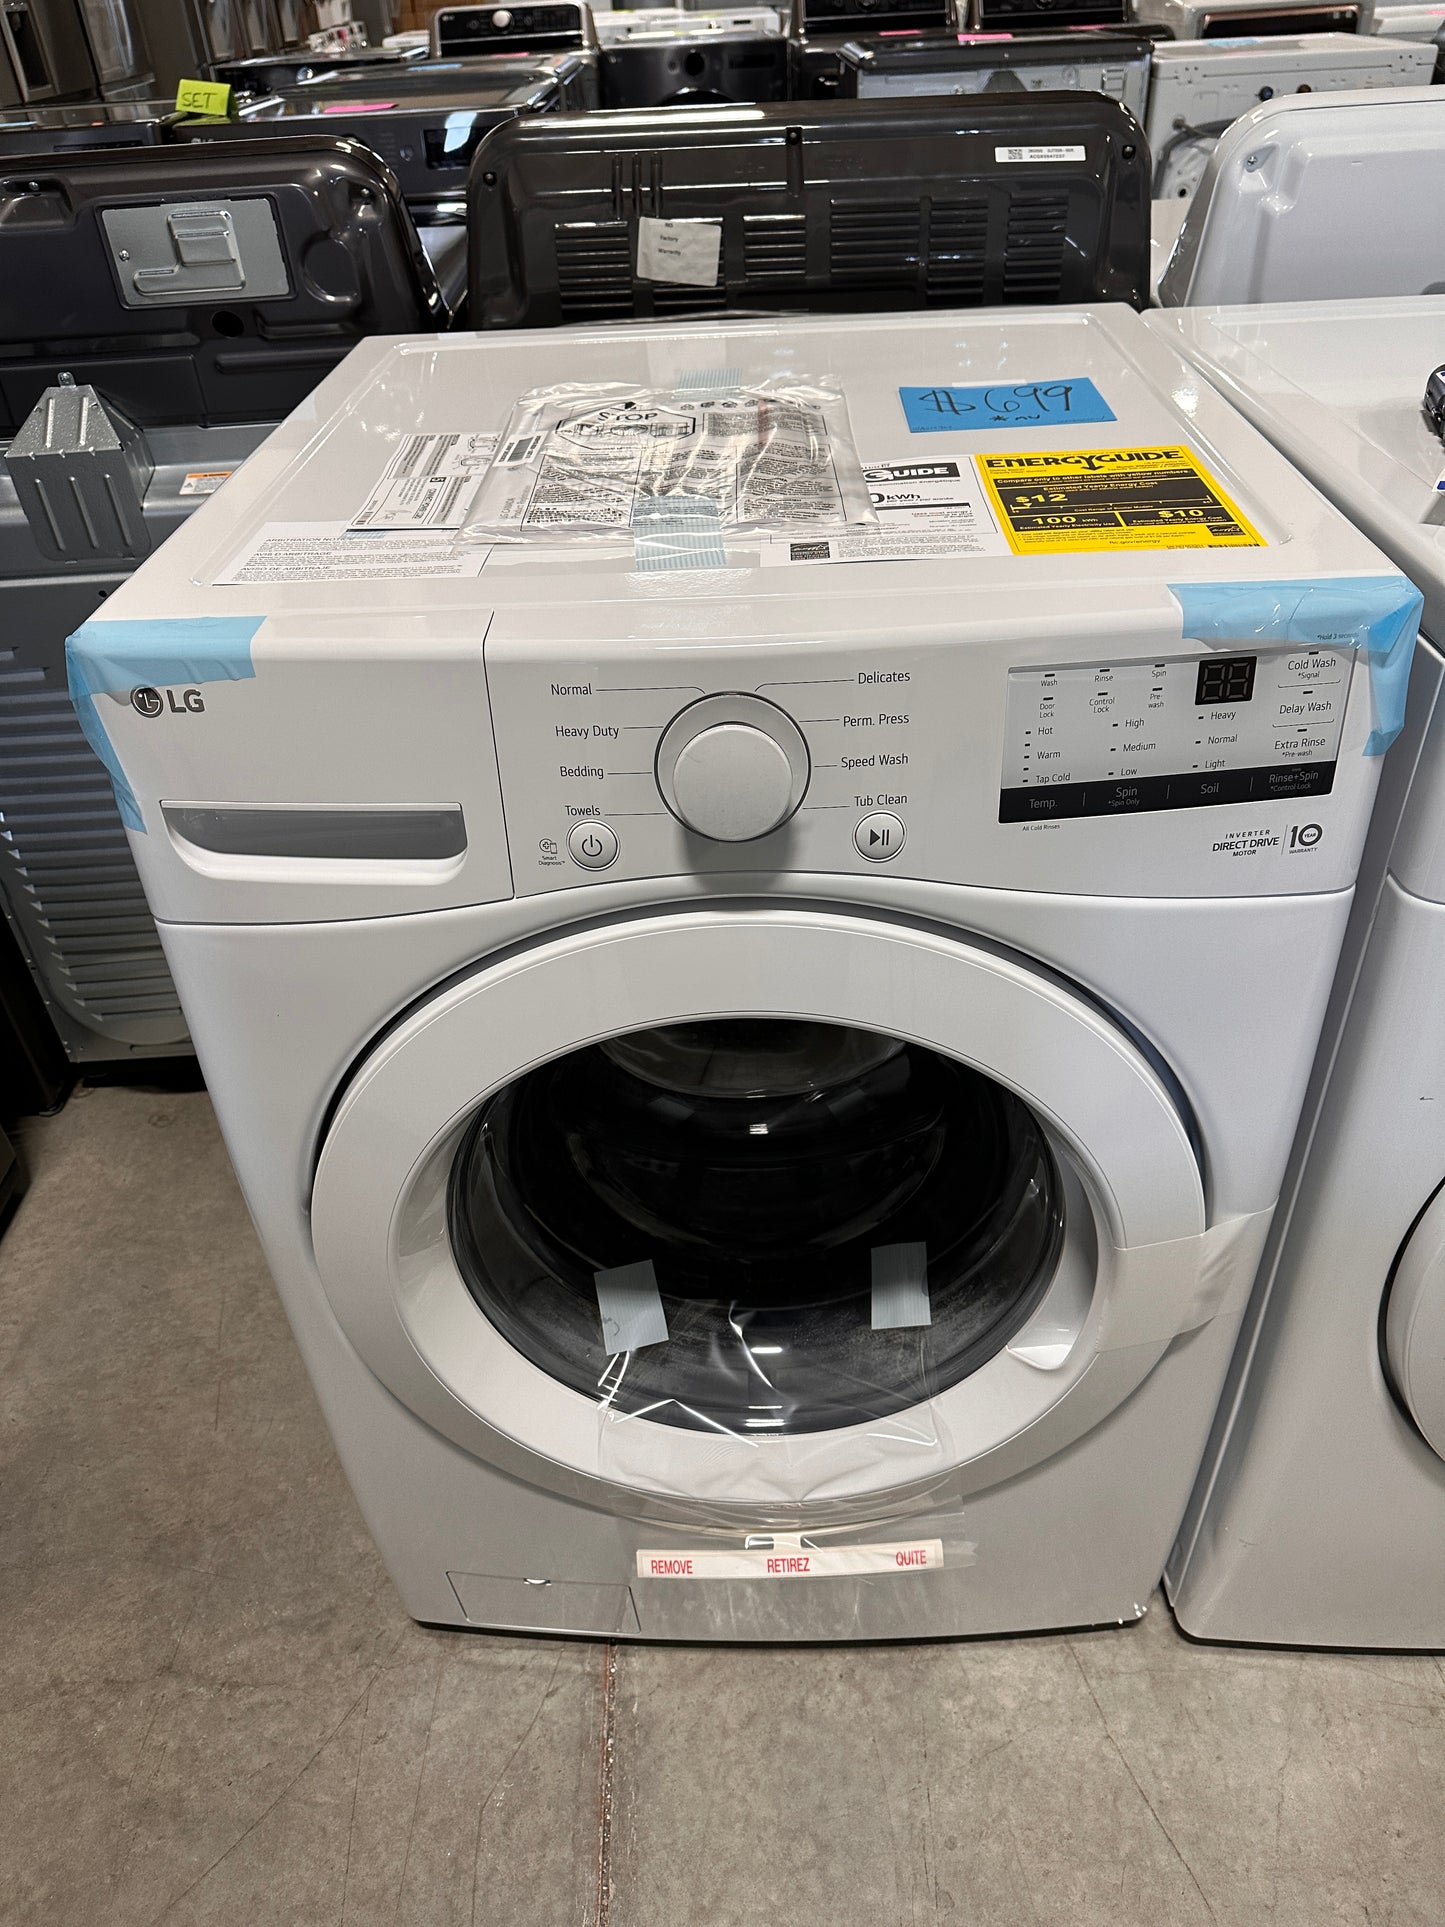 MODEL WM3400CW FRONT LOAD WASHER - WAS12902